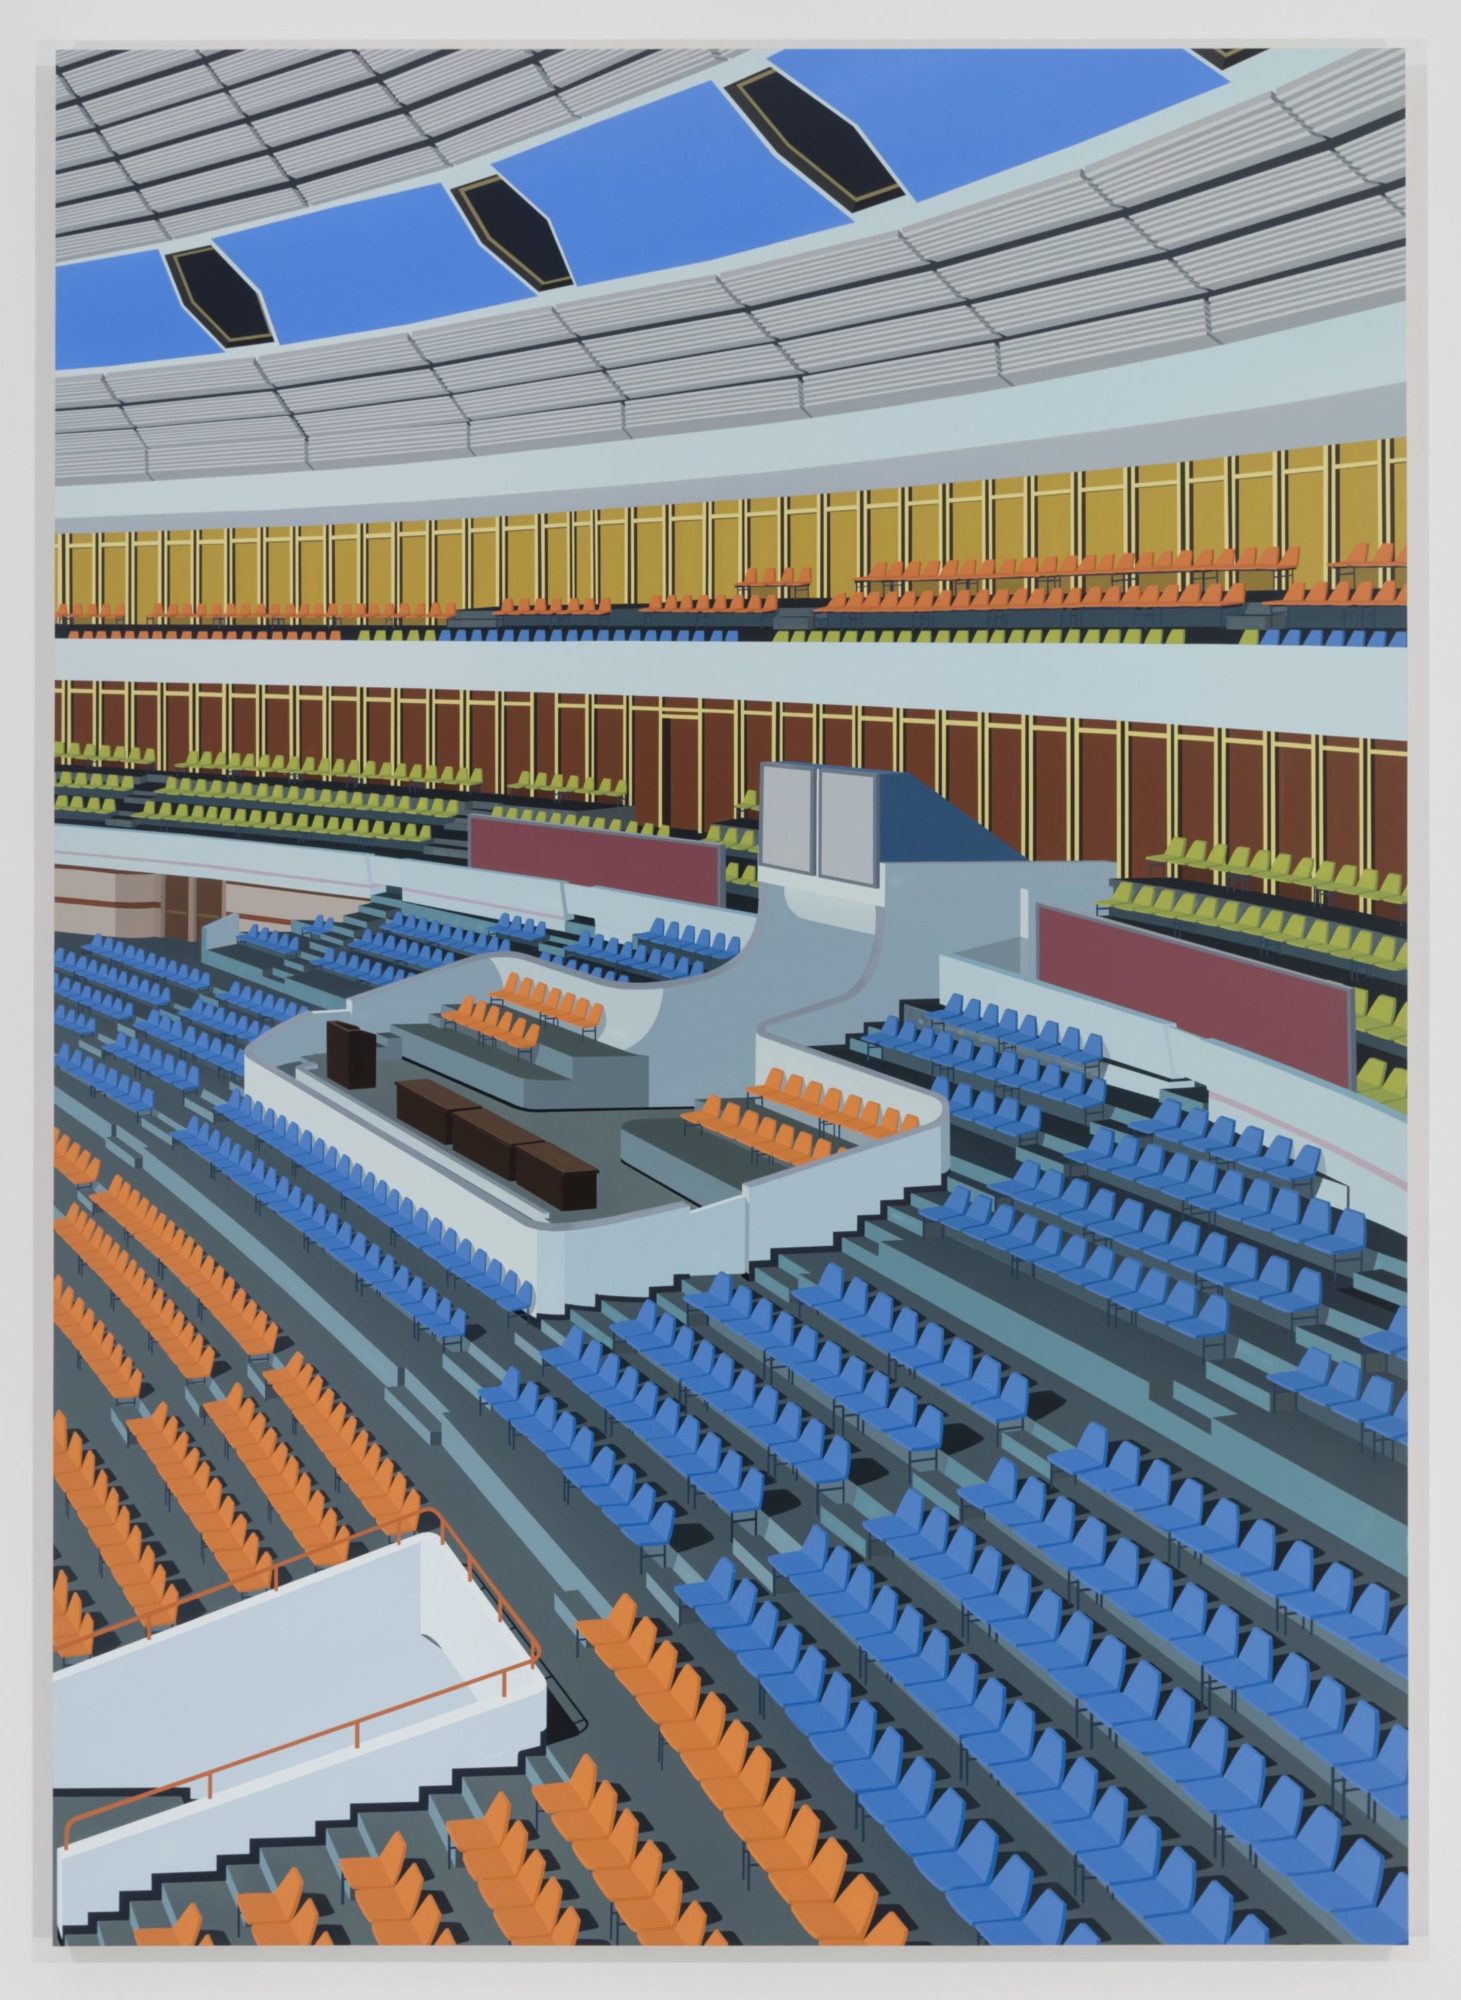 Depiction of a large but empty stadium.